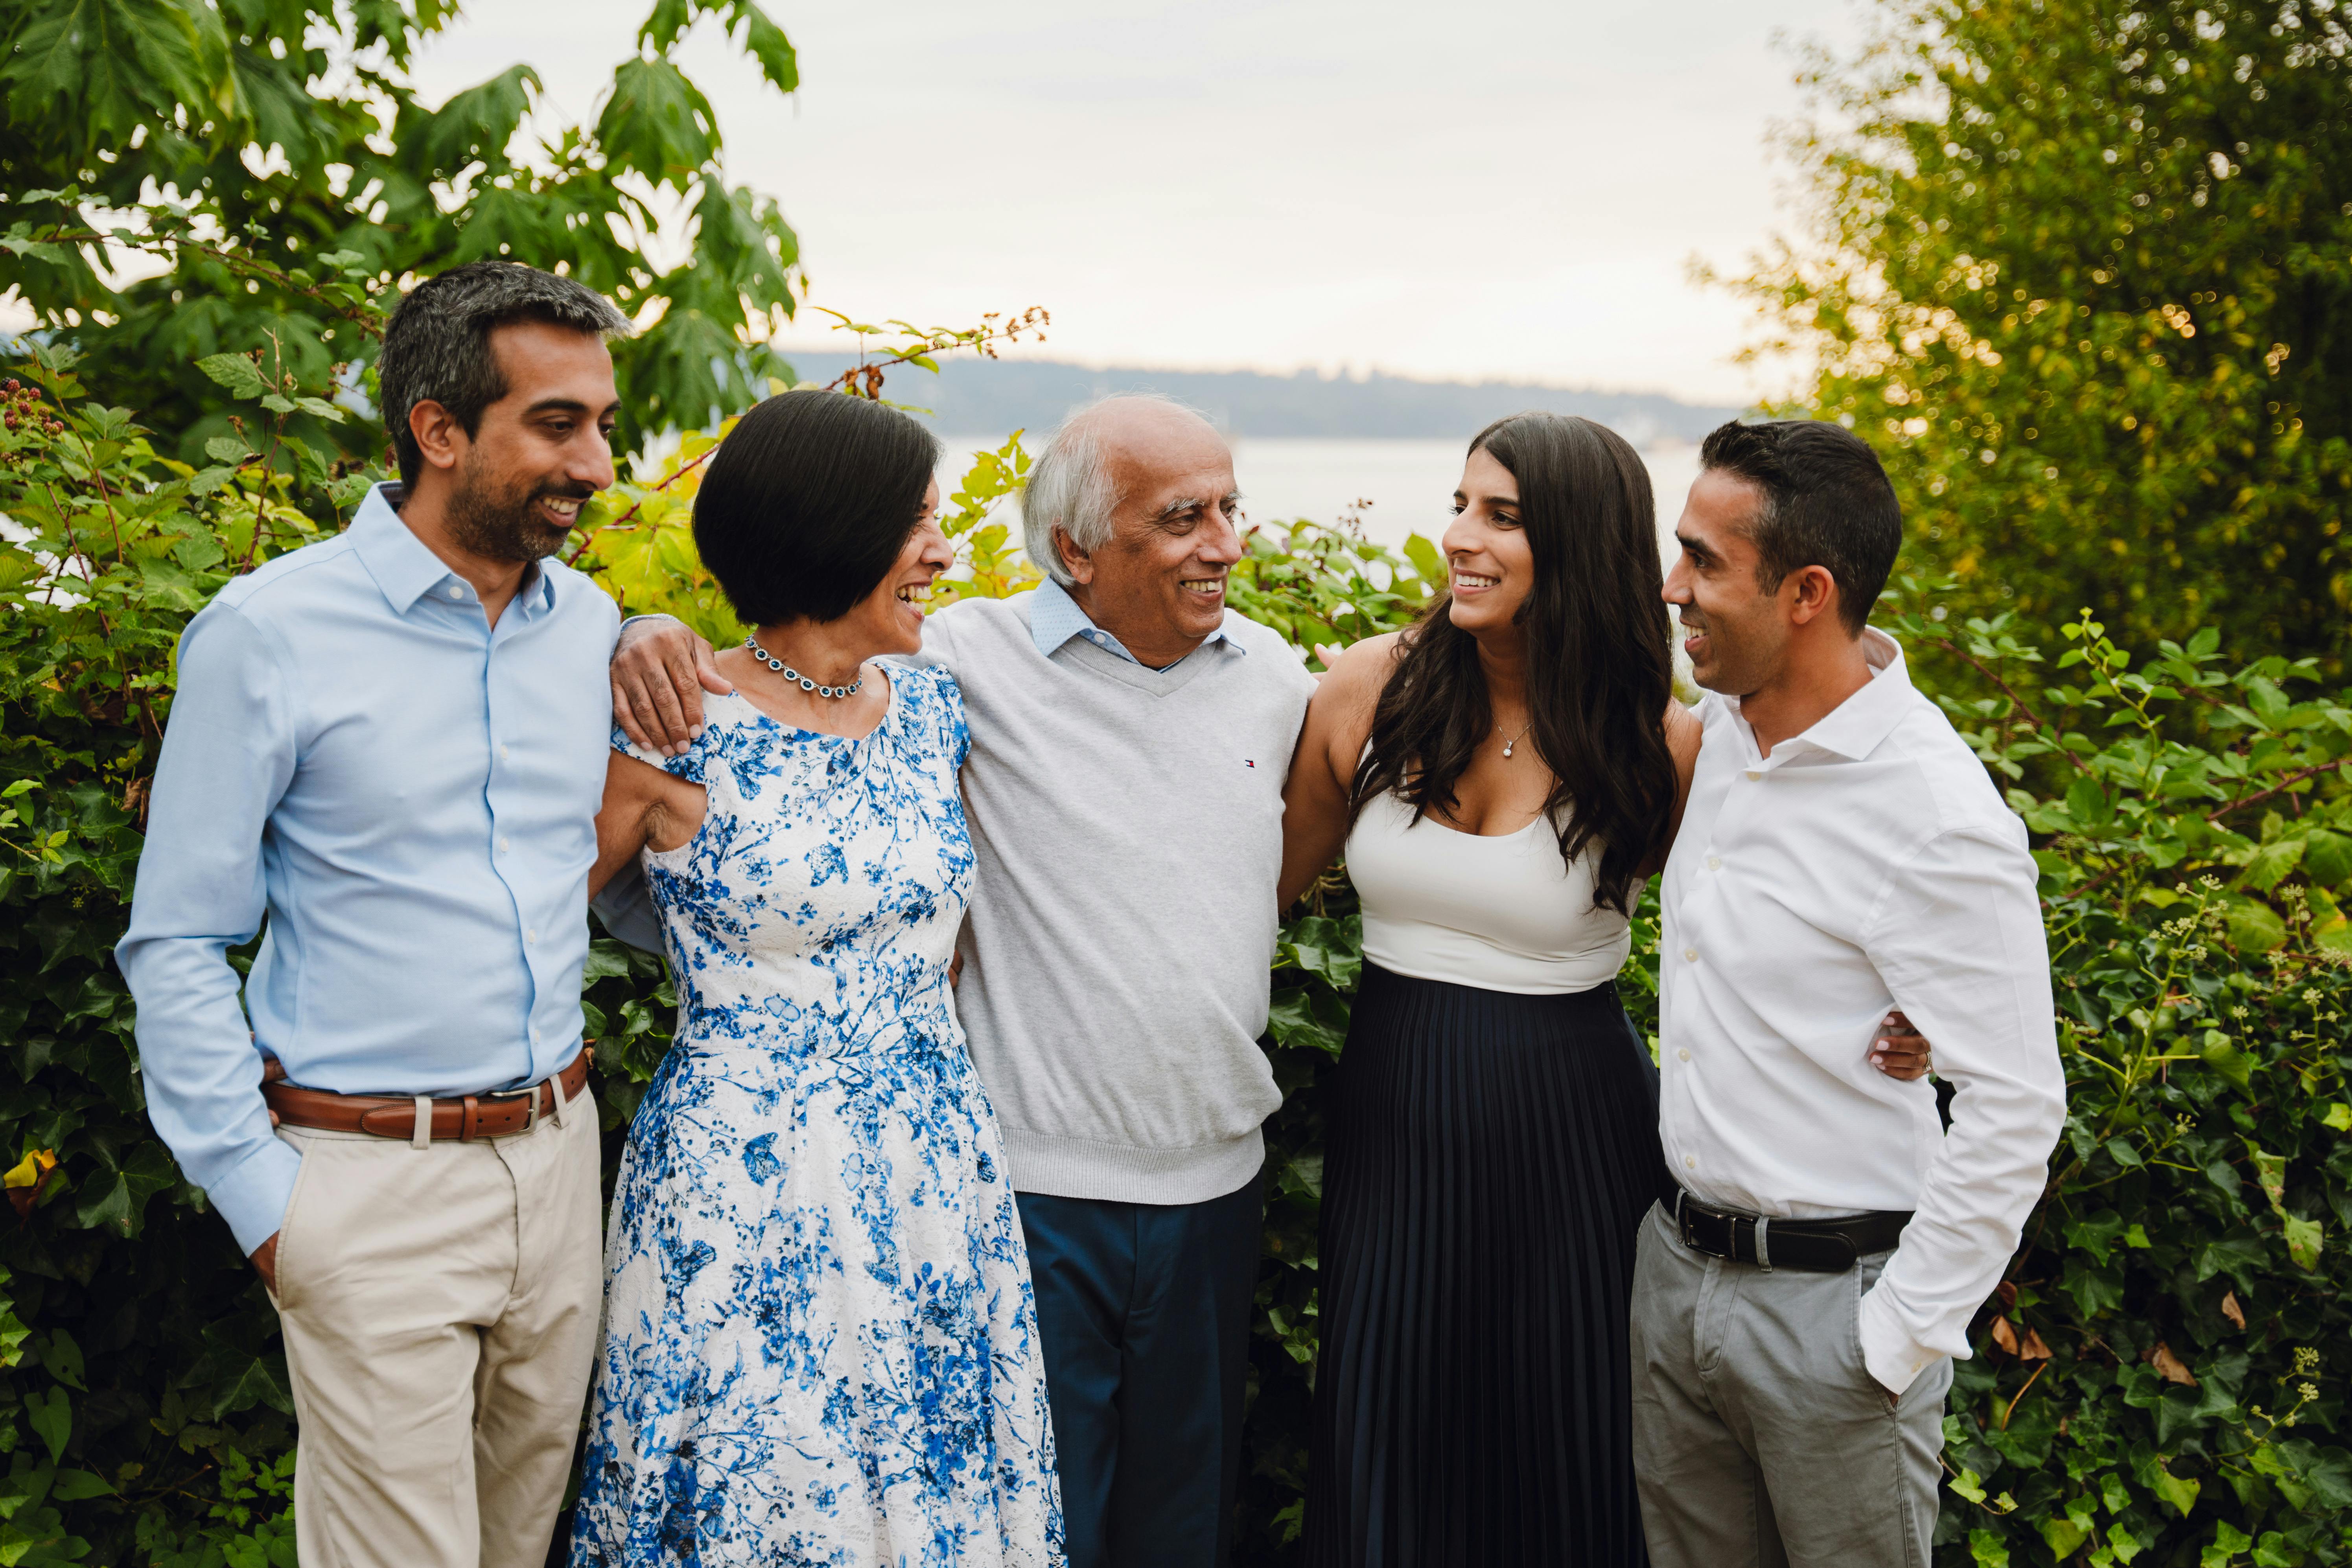 A happy family embracing while gathered together | Source: Pexels